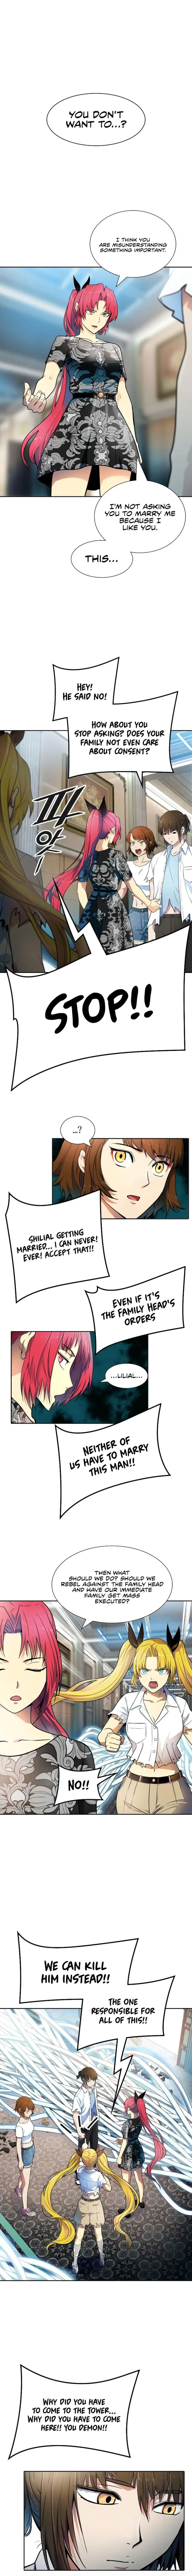 Tower Of God Chapter 569 Page 3